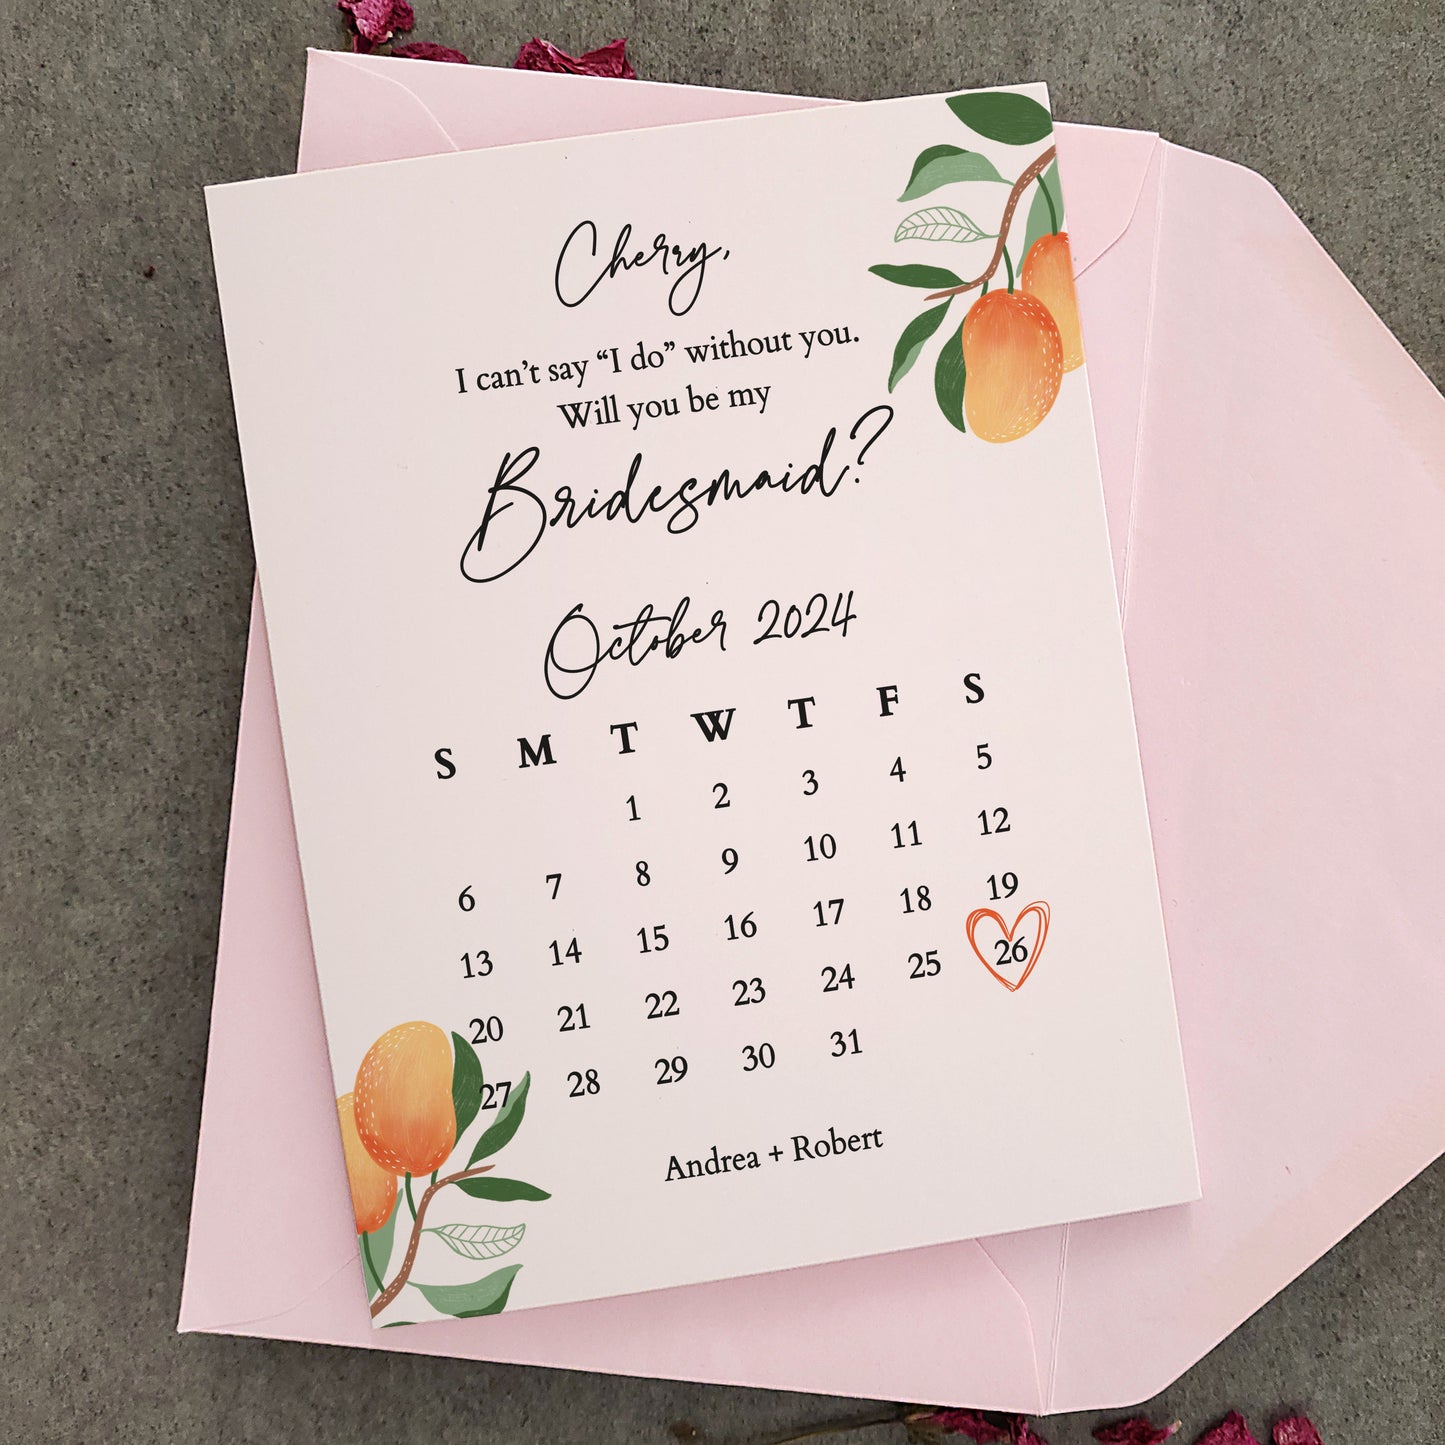 personalized will you be my bridesmaid proposal card in rustic calendar design - XOXOKristen